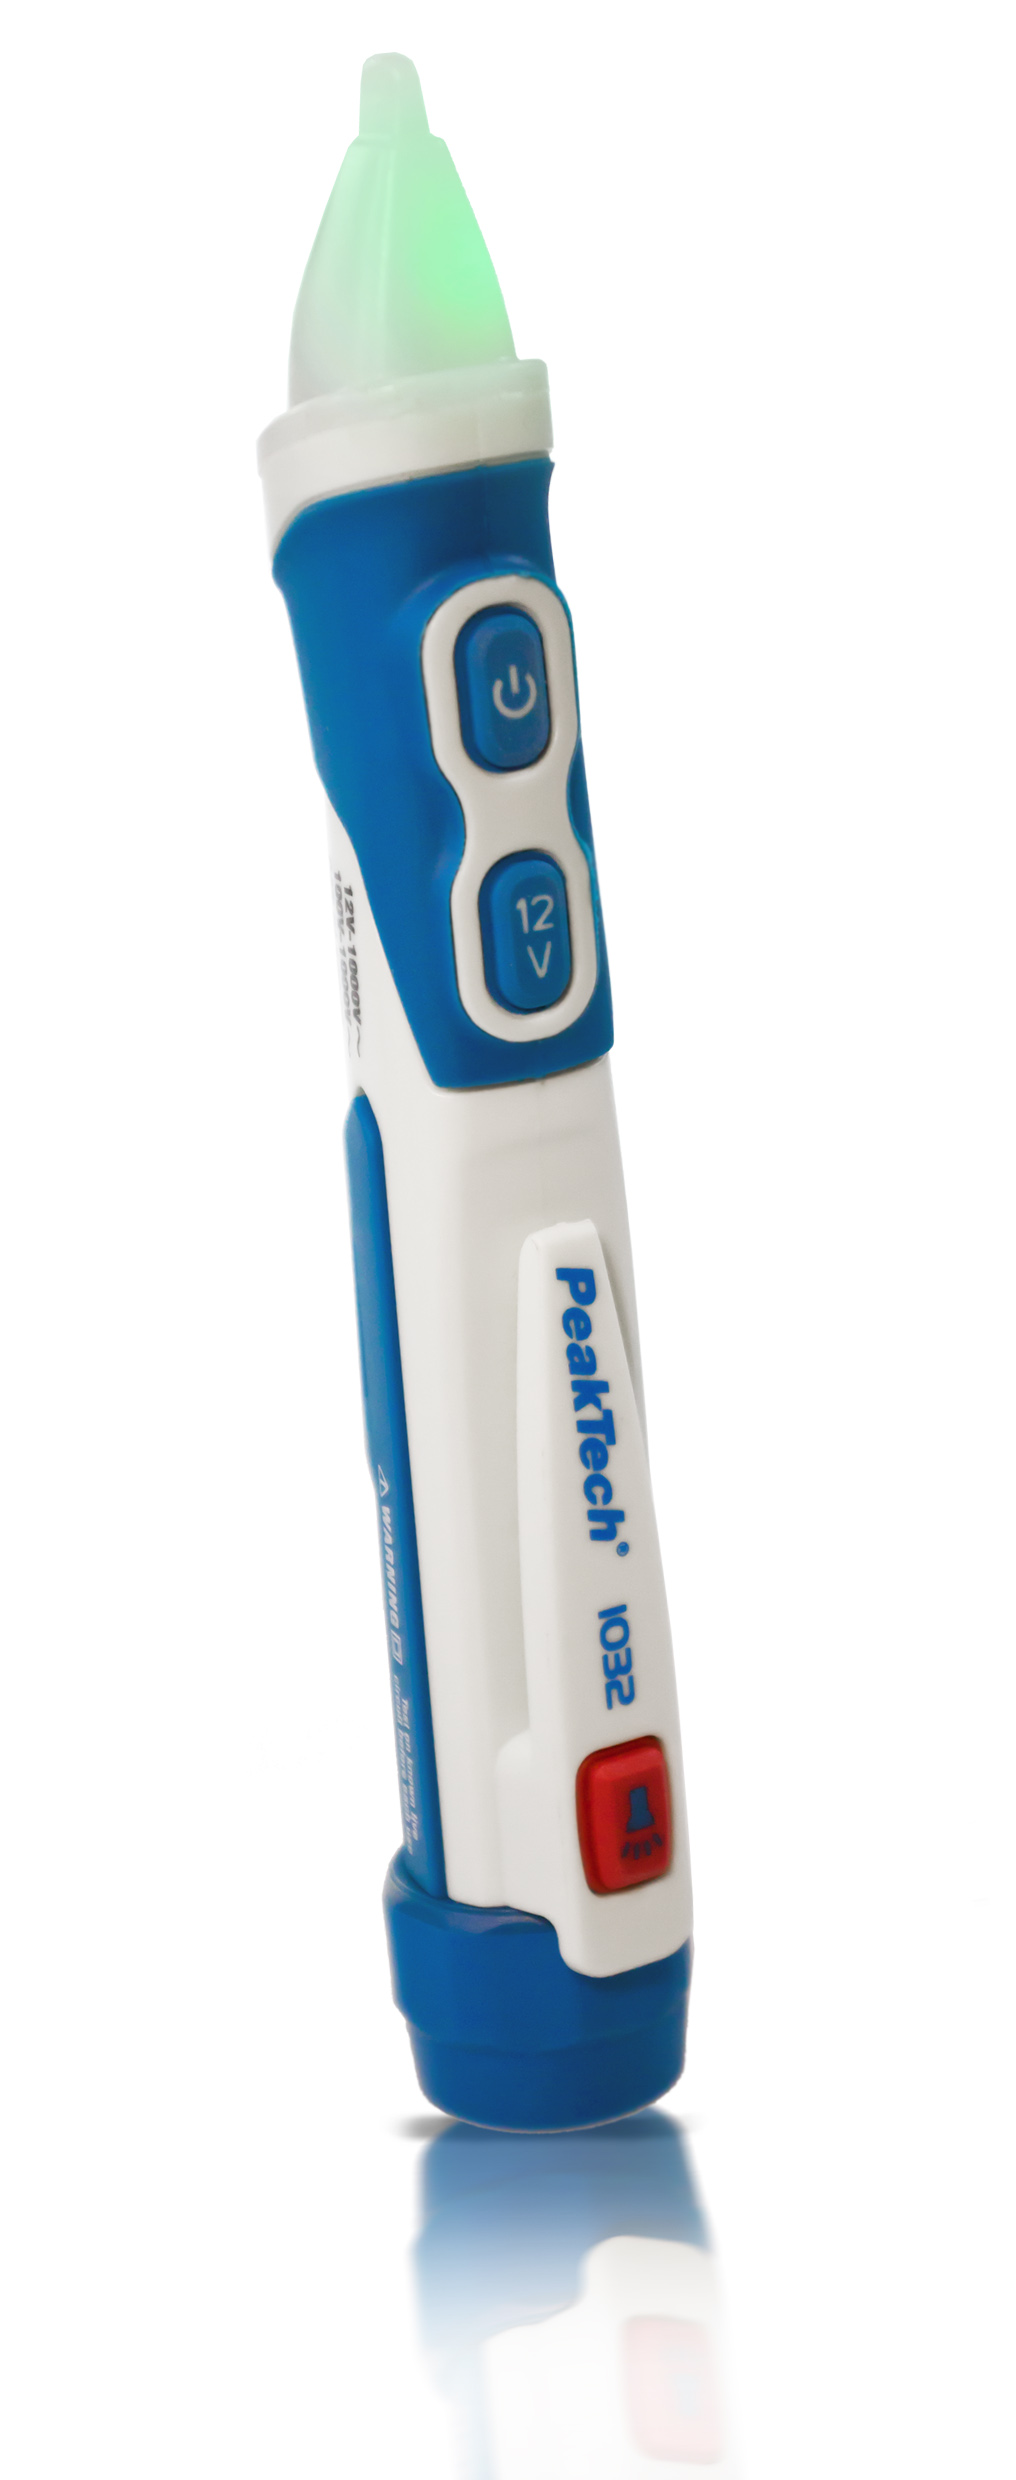 «PeakTech® P 1032» AC voltage tester 12 - 1000 V AC with vibration